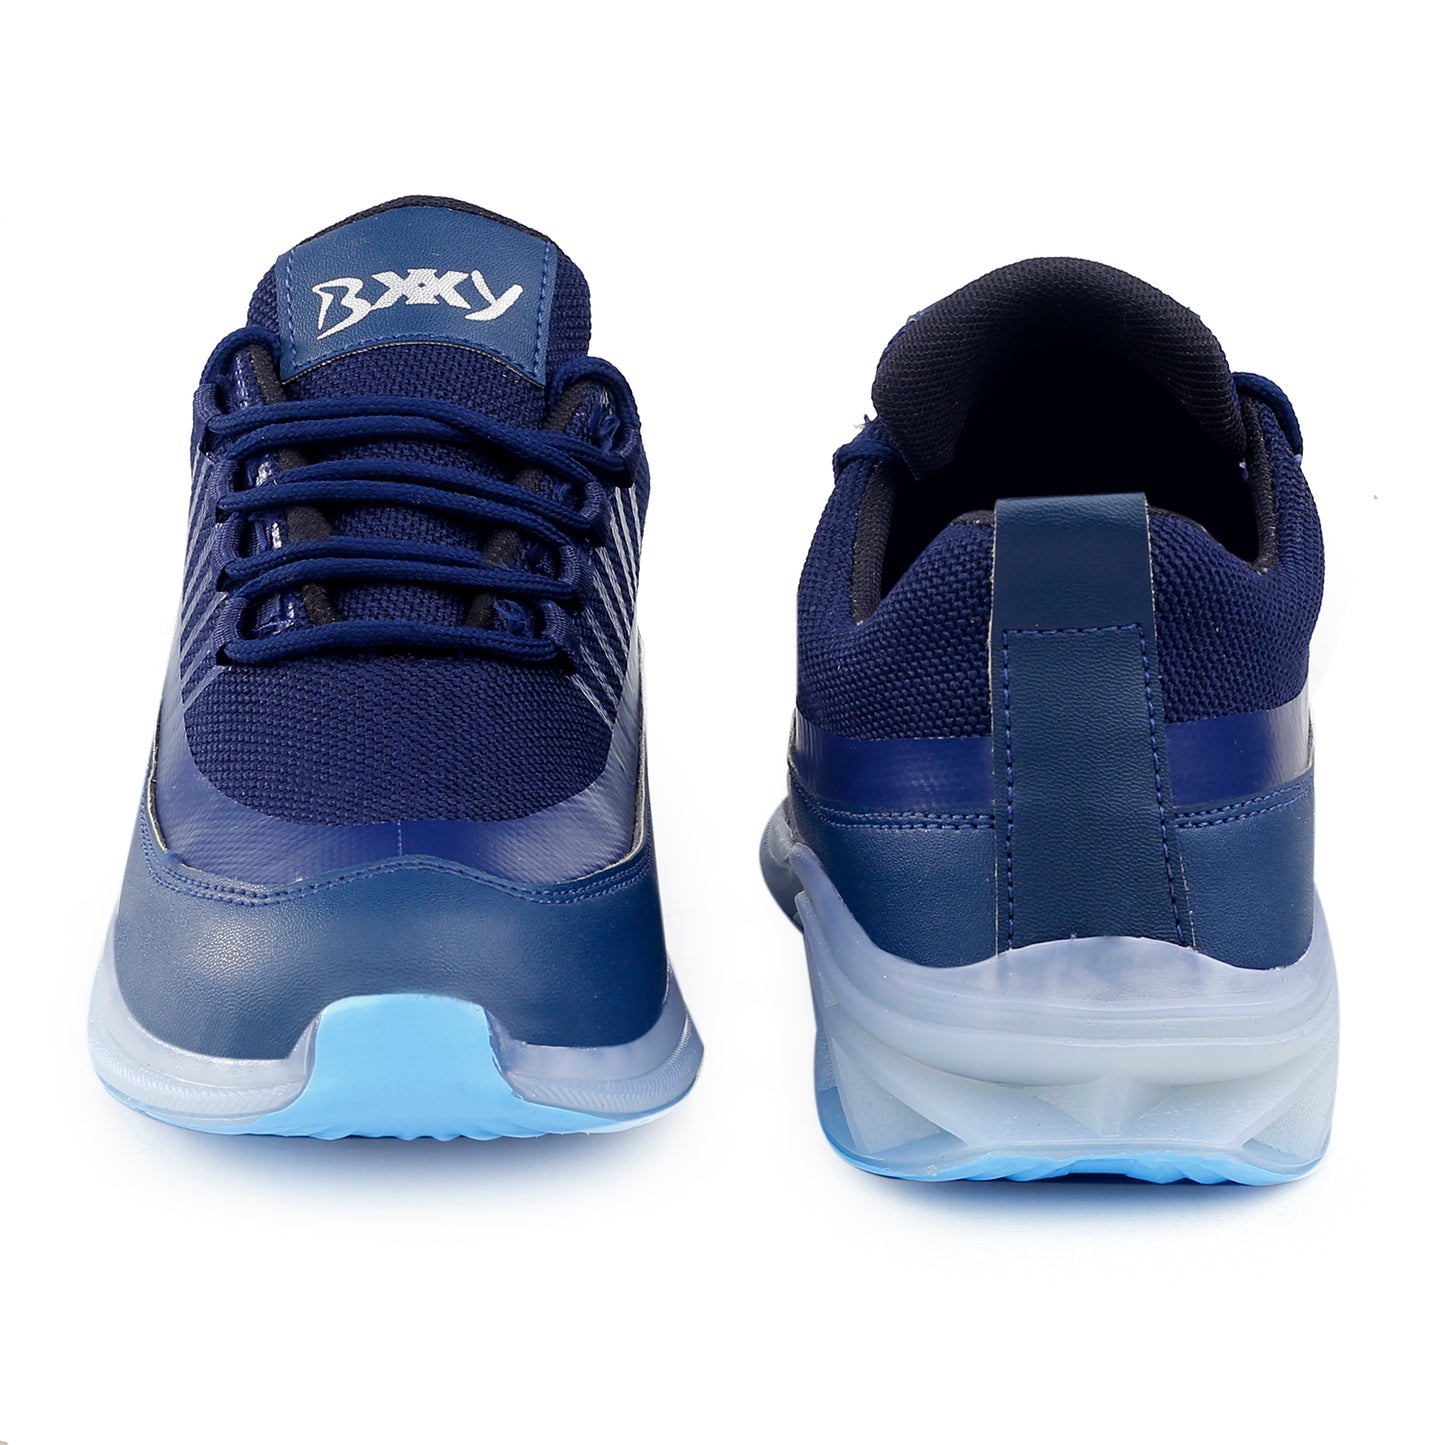 Bxxy's Casual Sports Running Shoes On Transparent Sole